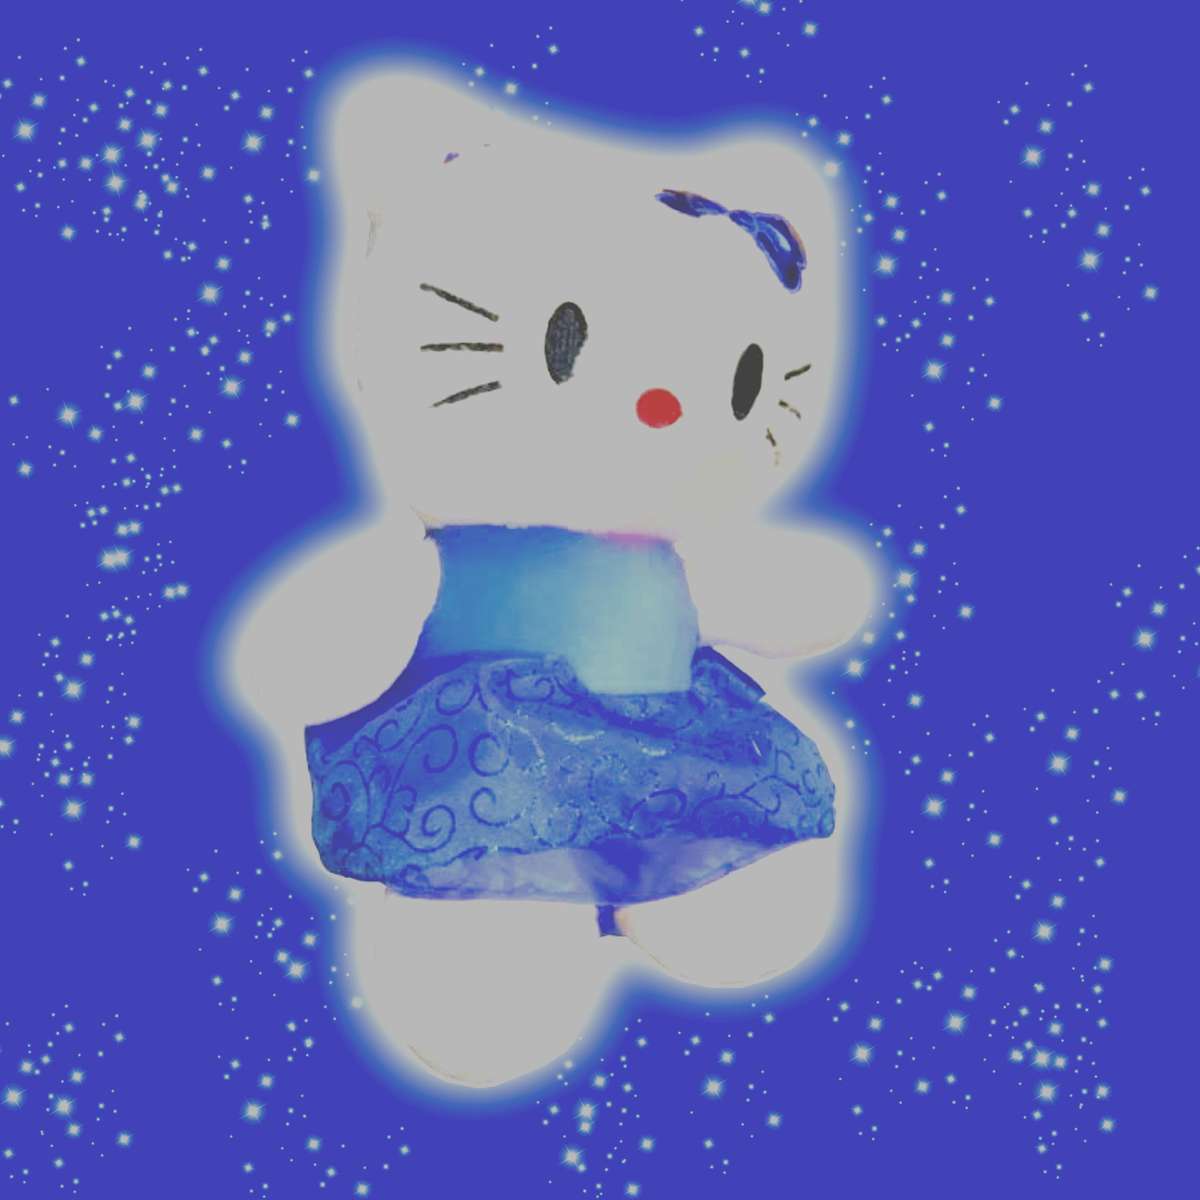 Hello Kitty online puzzle